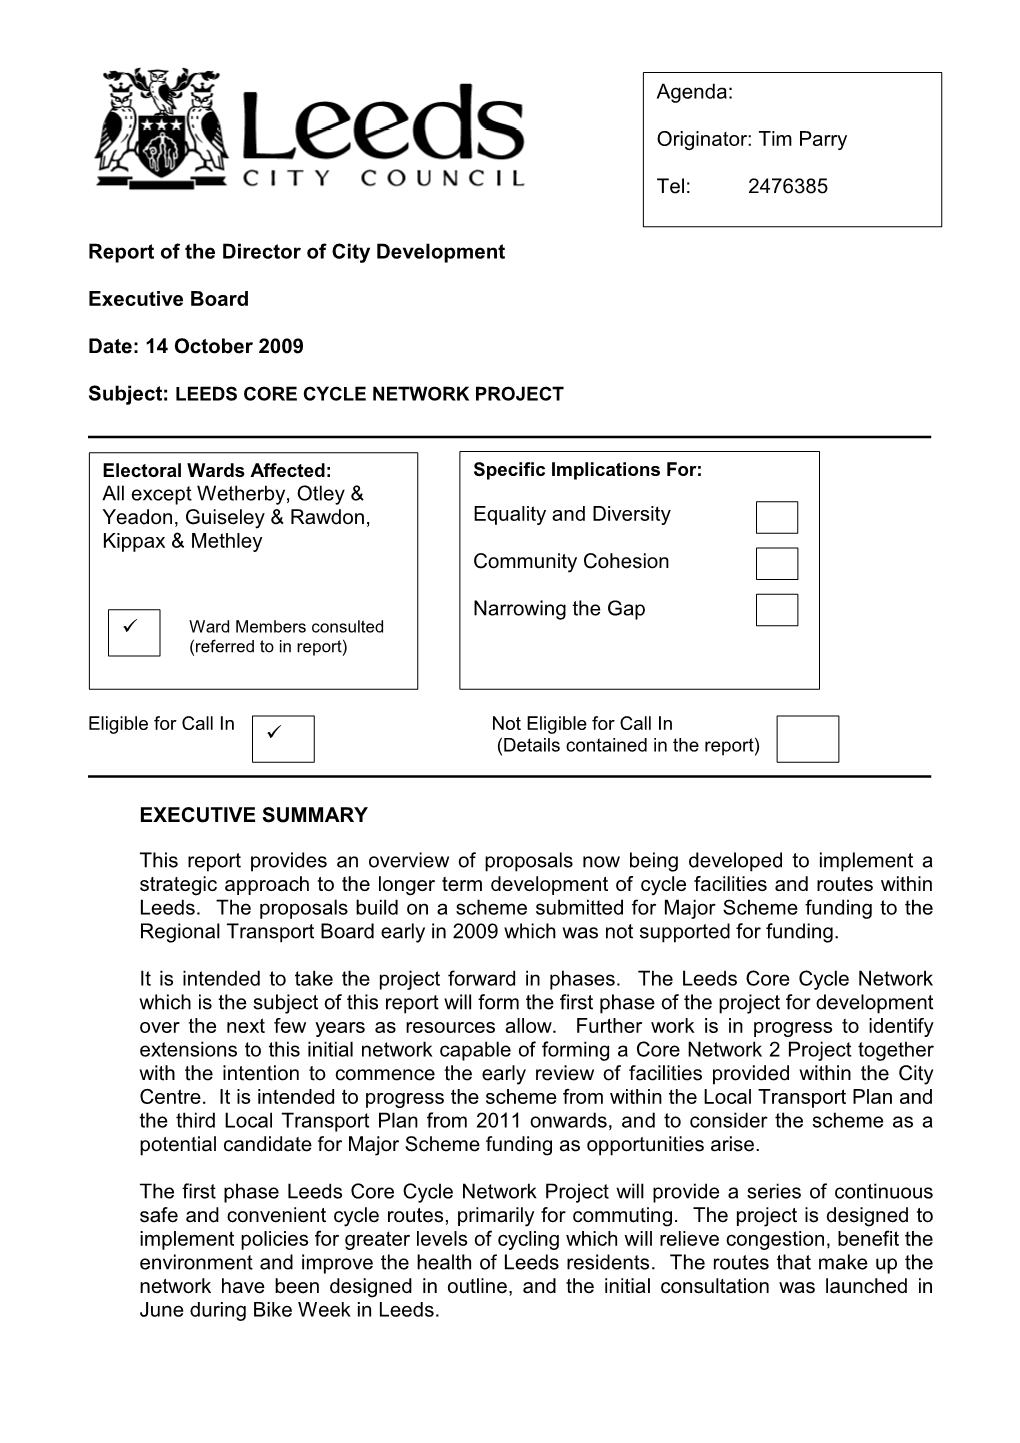 Report of the Director of City Development